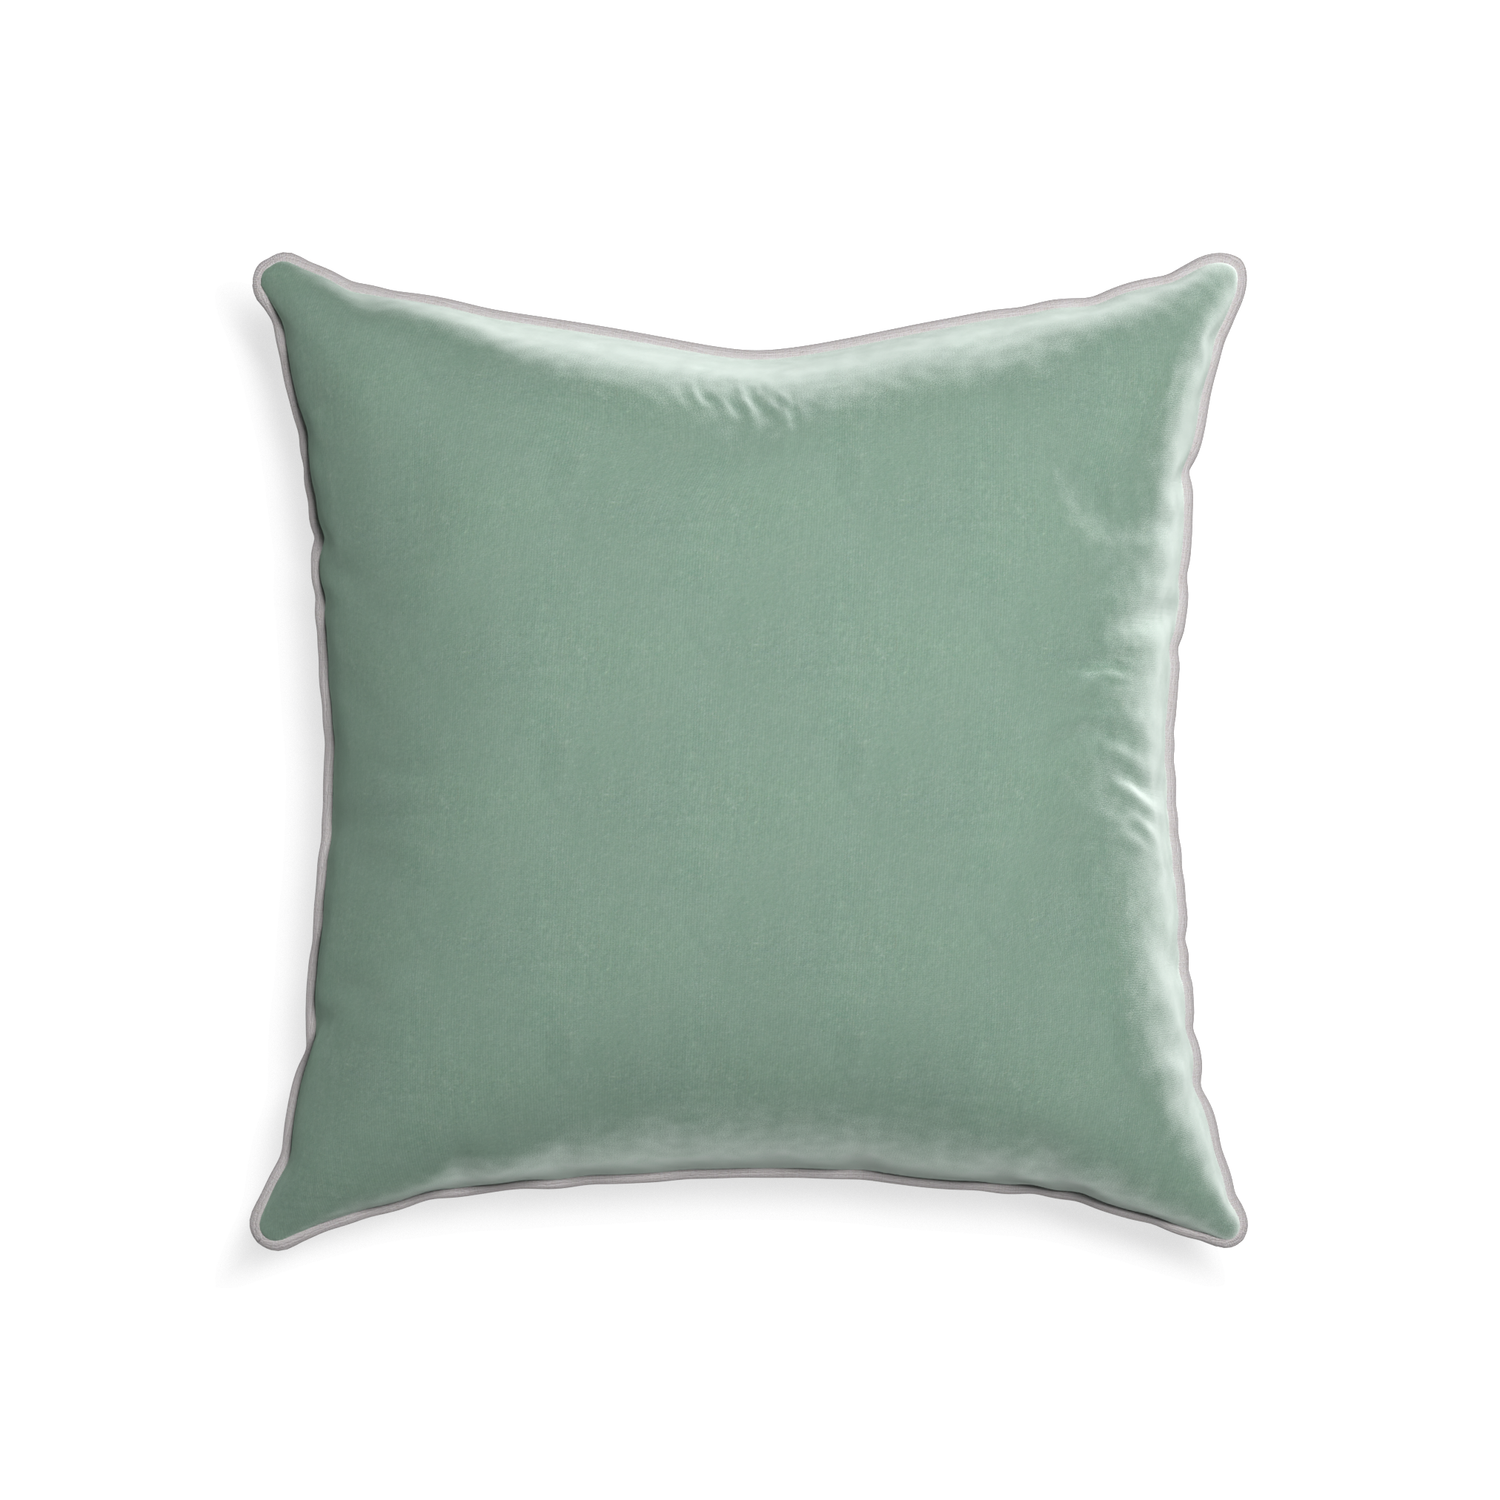 square blue green velvet pillow with gray piping